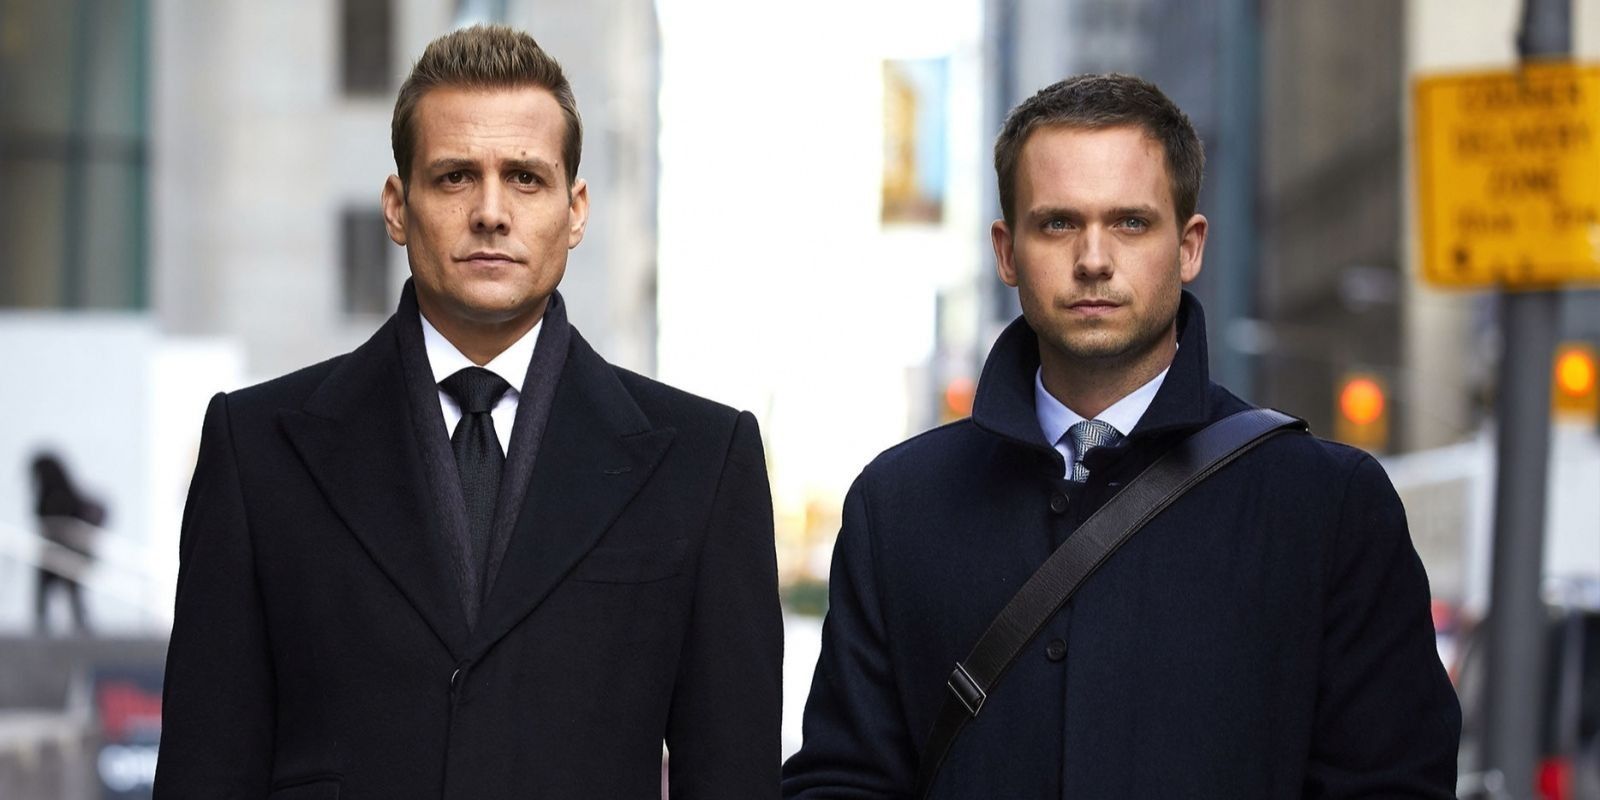 Harvey and Mike on the street in Suits.